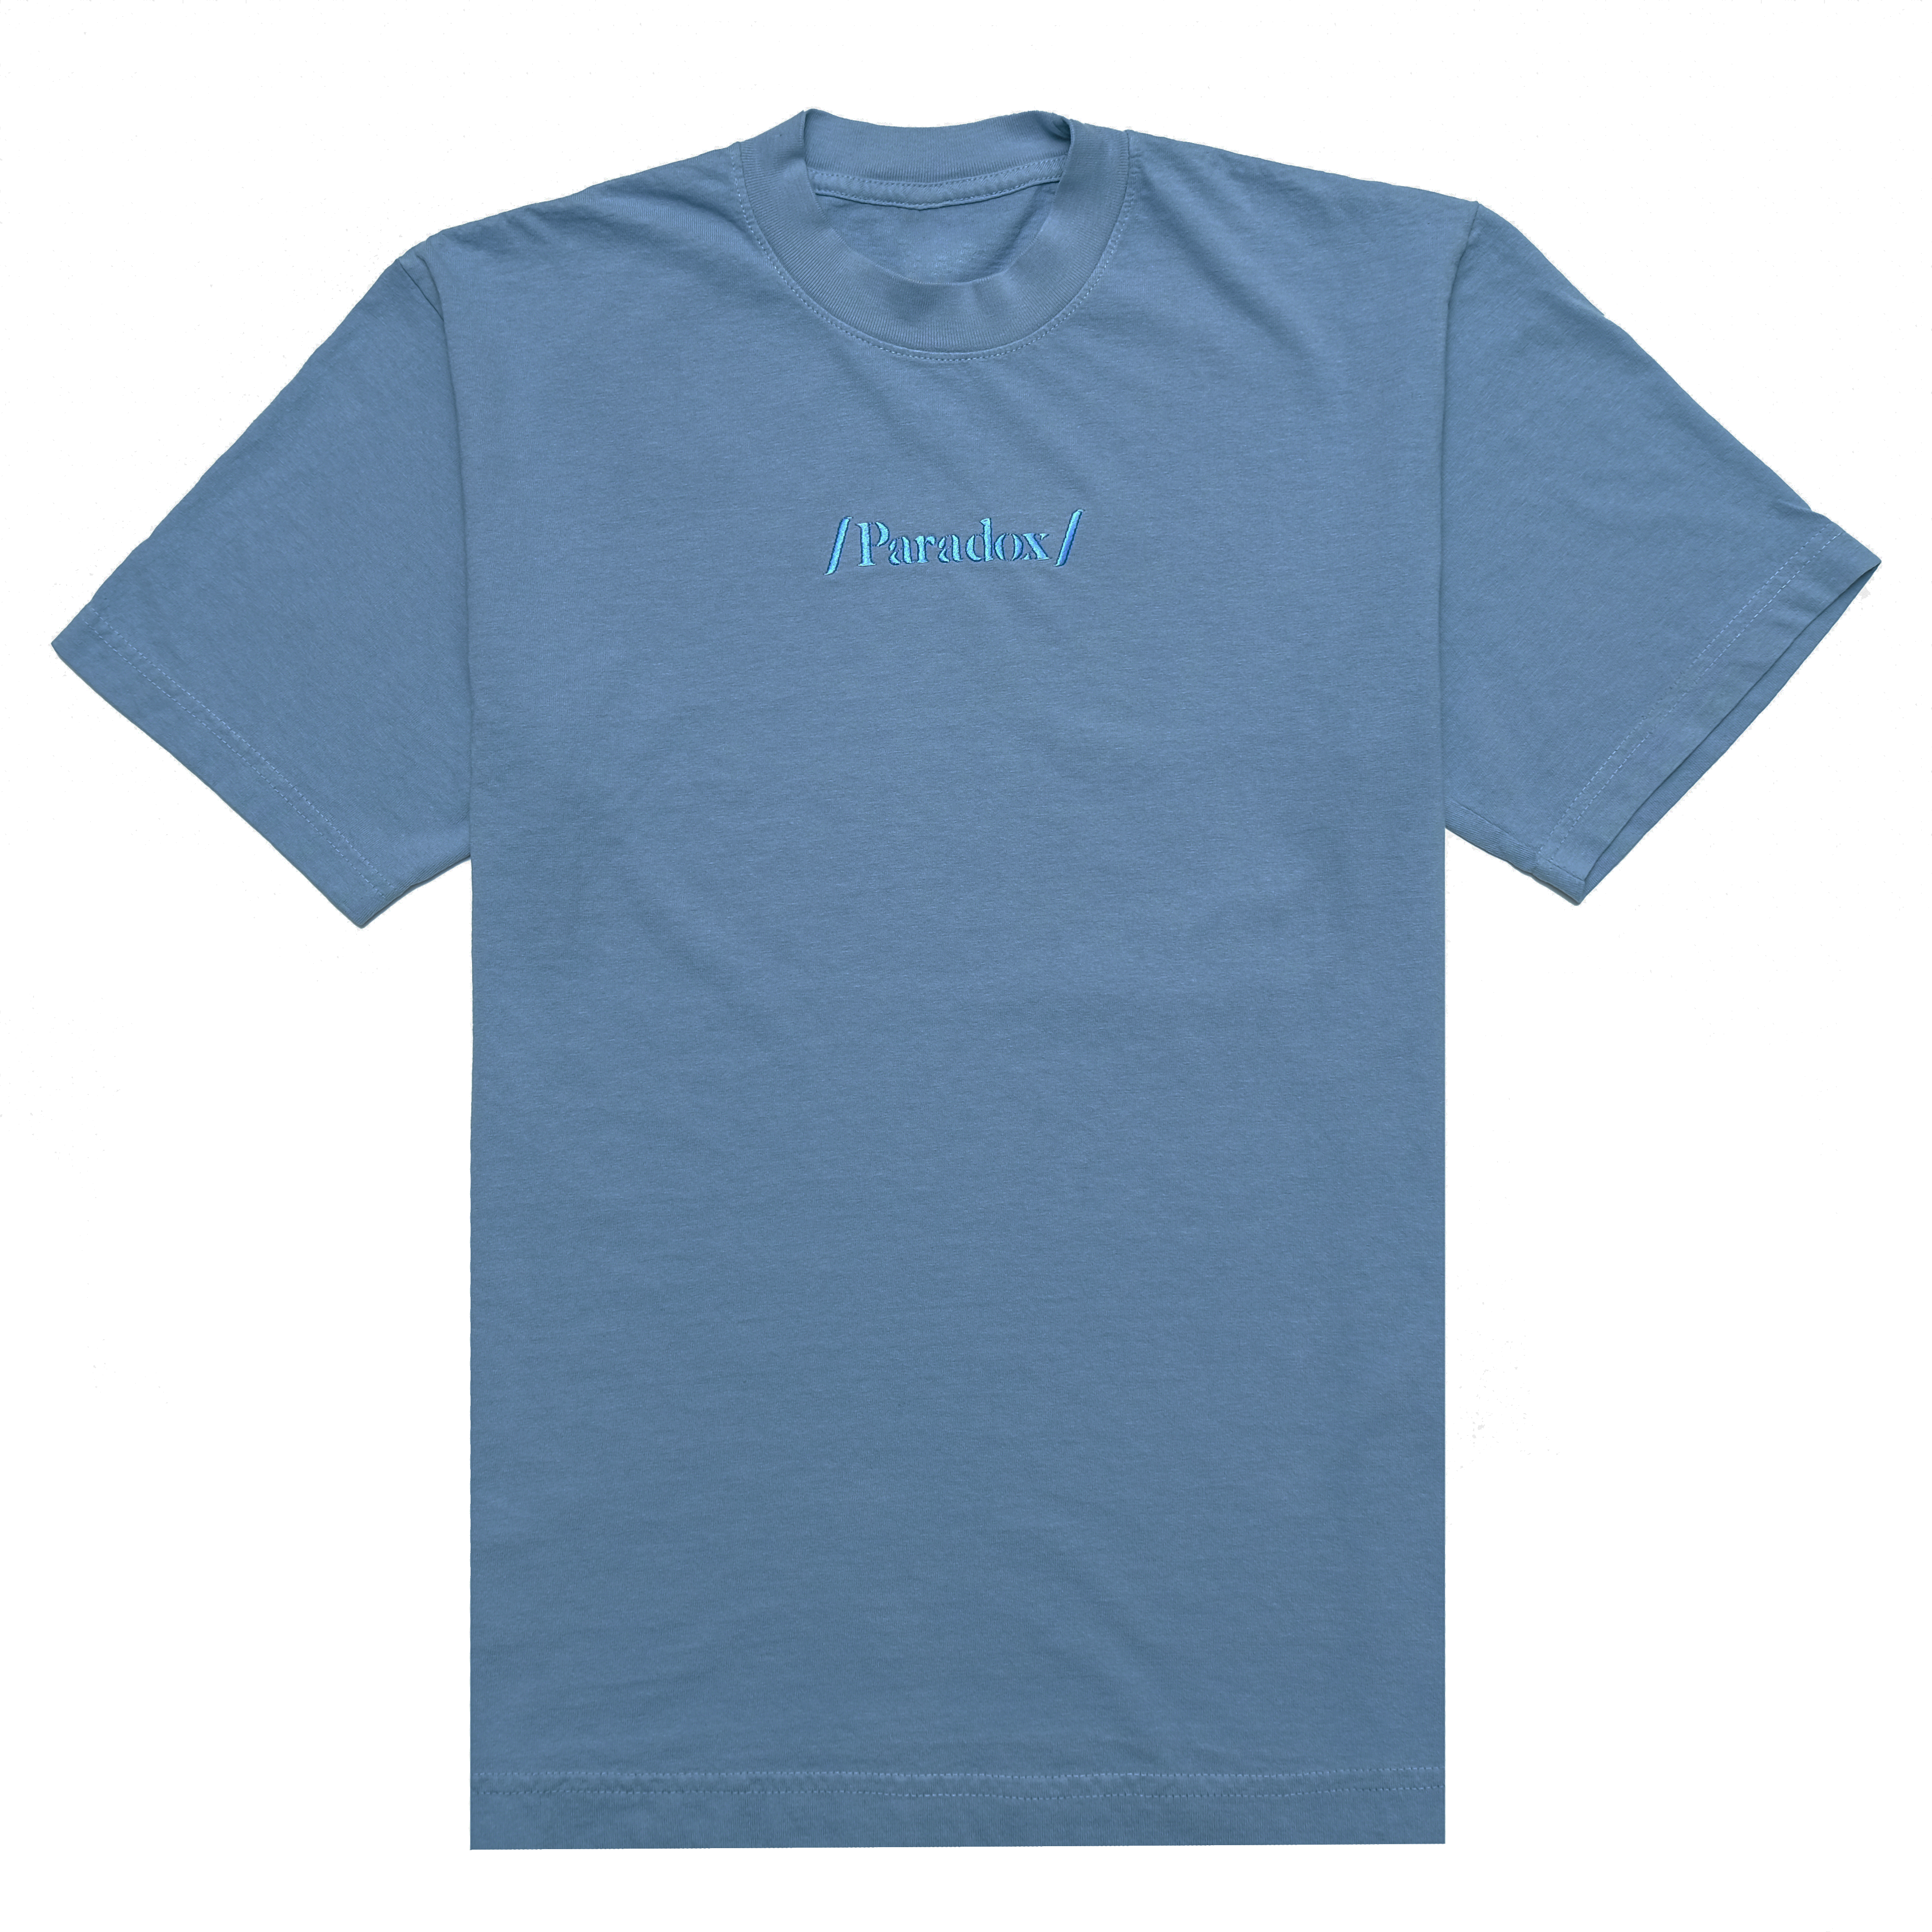 Anniversary Tee - Melted Halo Halo (Blue)